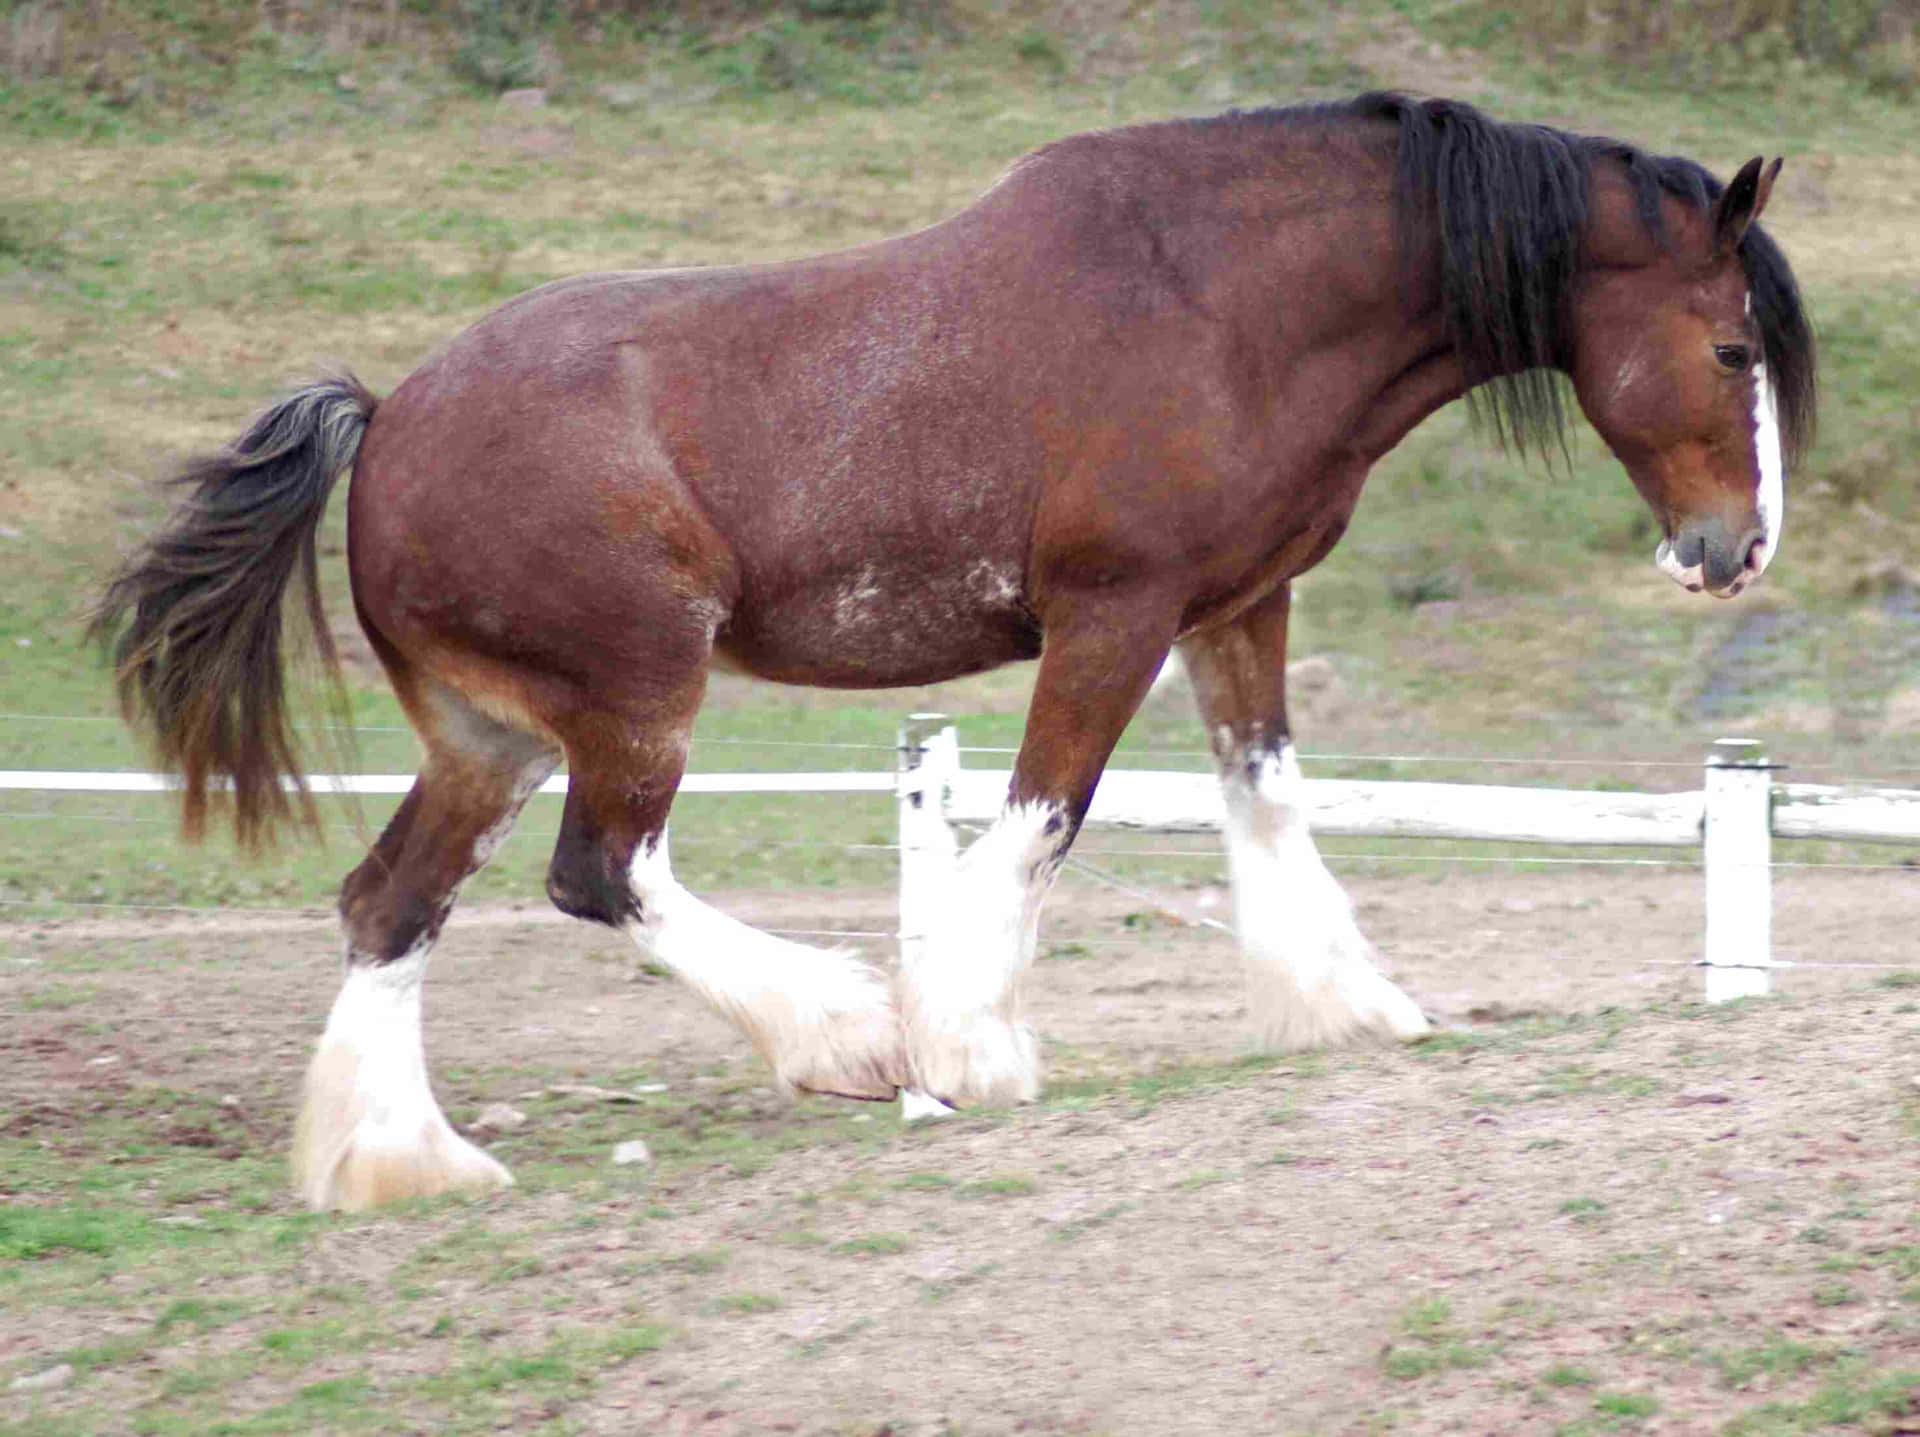 Looking Majestic - A Striking Clydesdale Horse